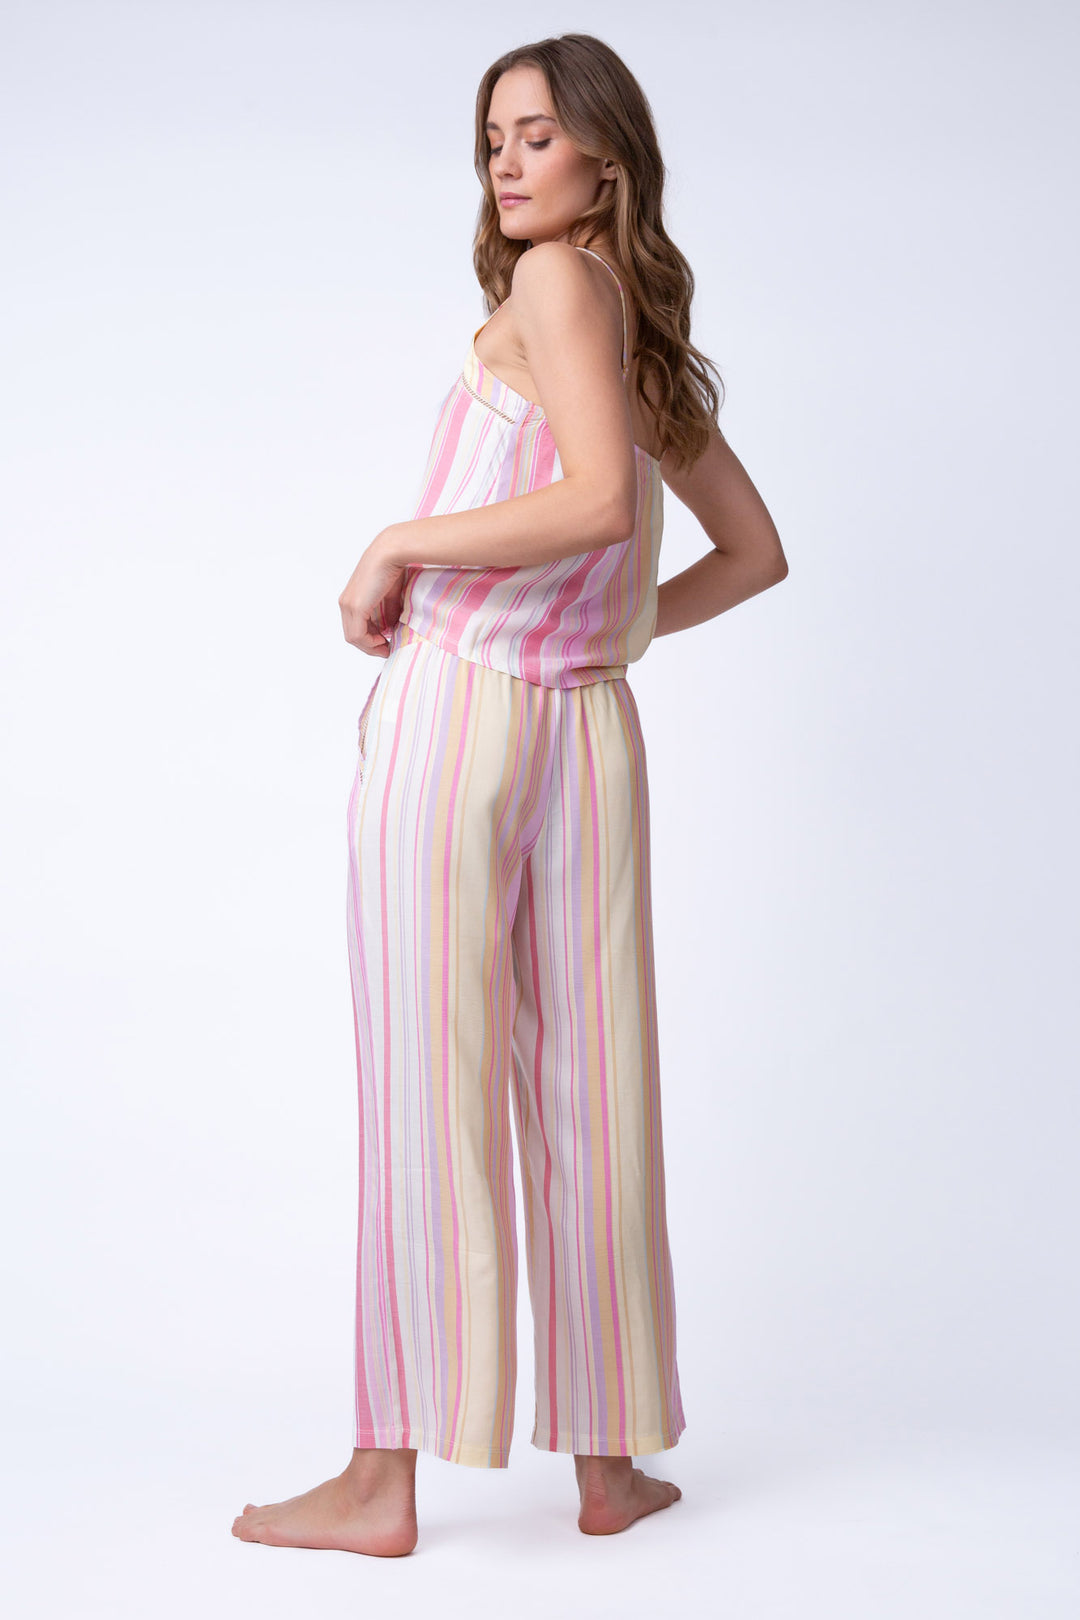 Women's striped lounge pant in pink-peach-natural. Cropped pant & tie waist.